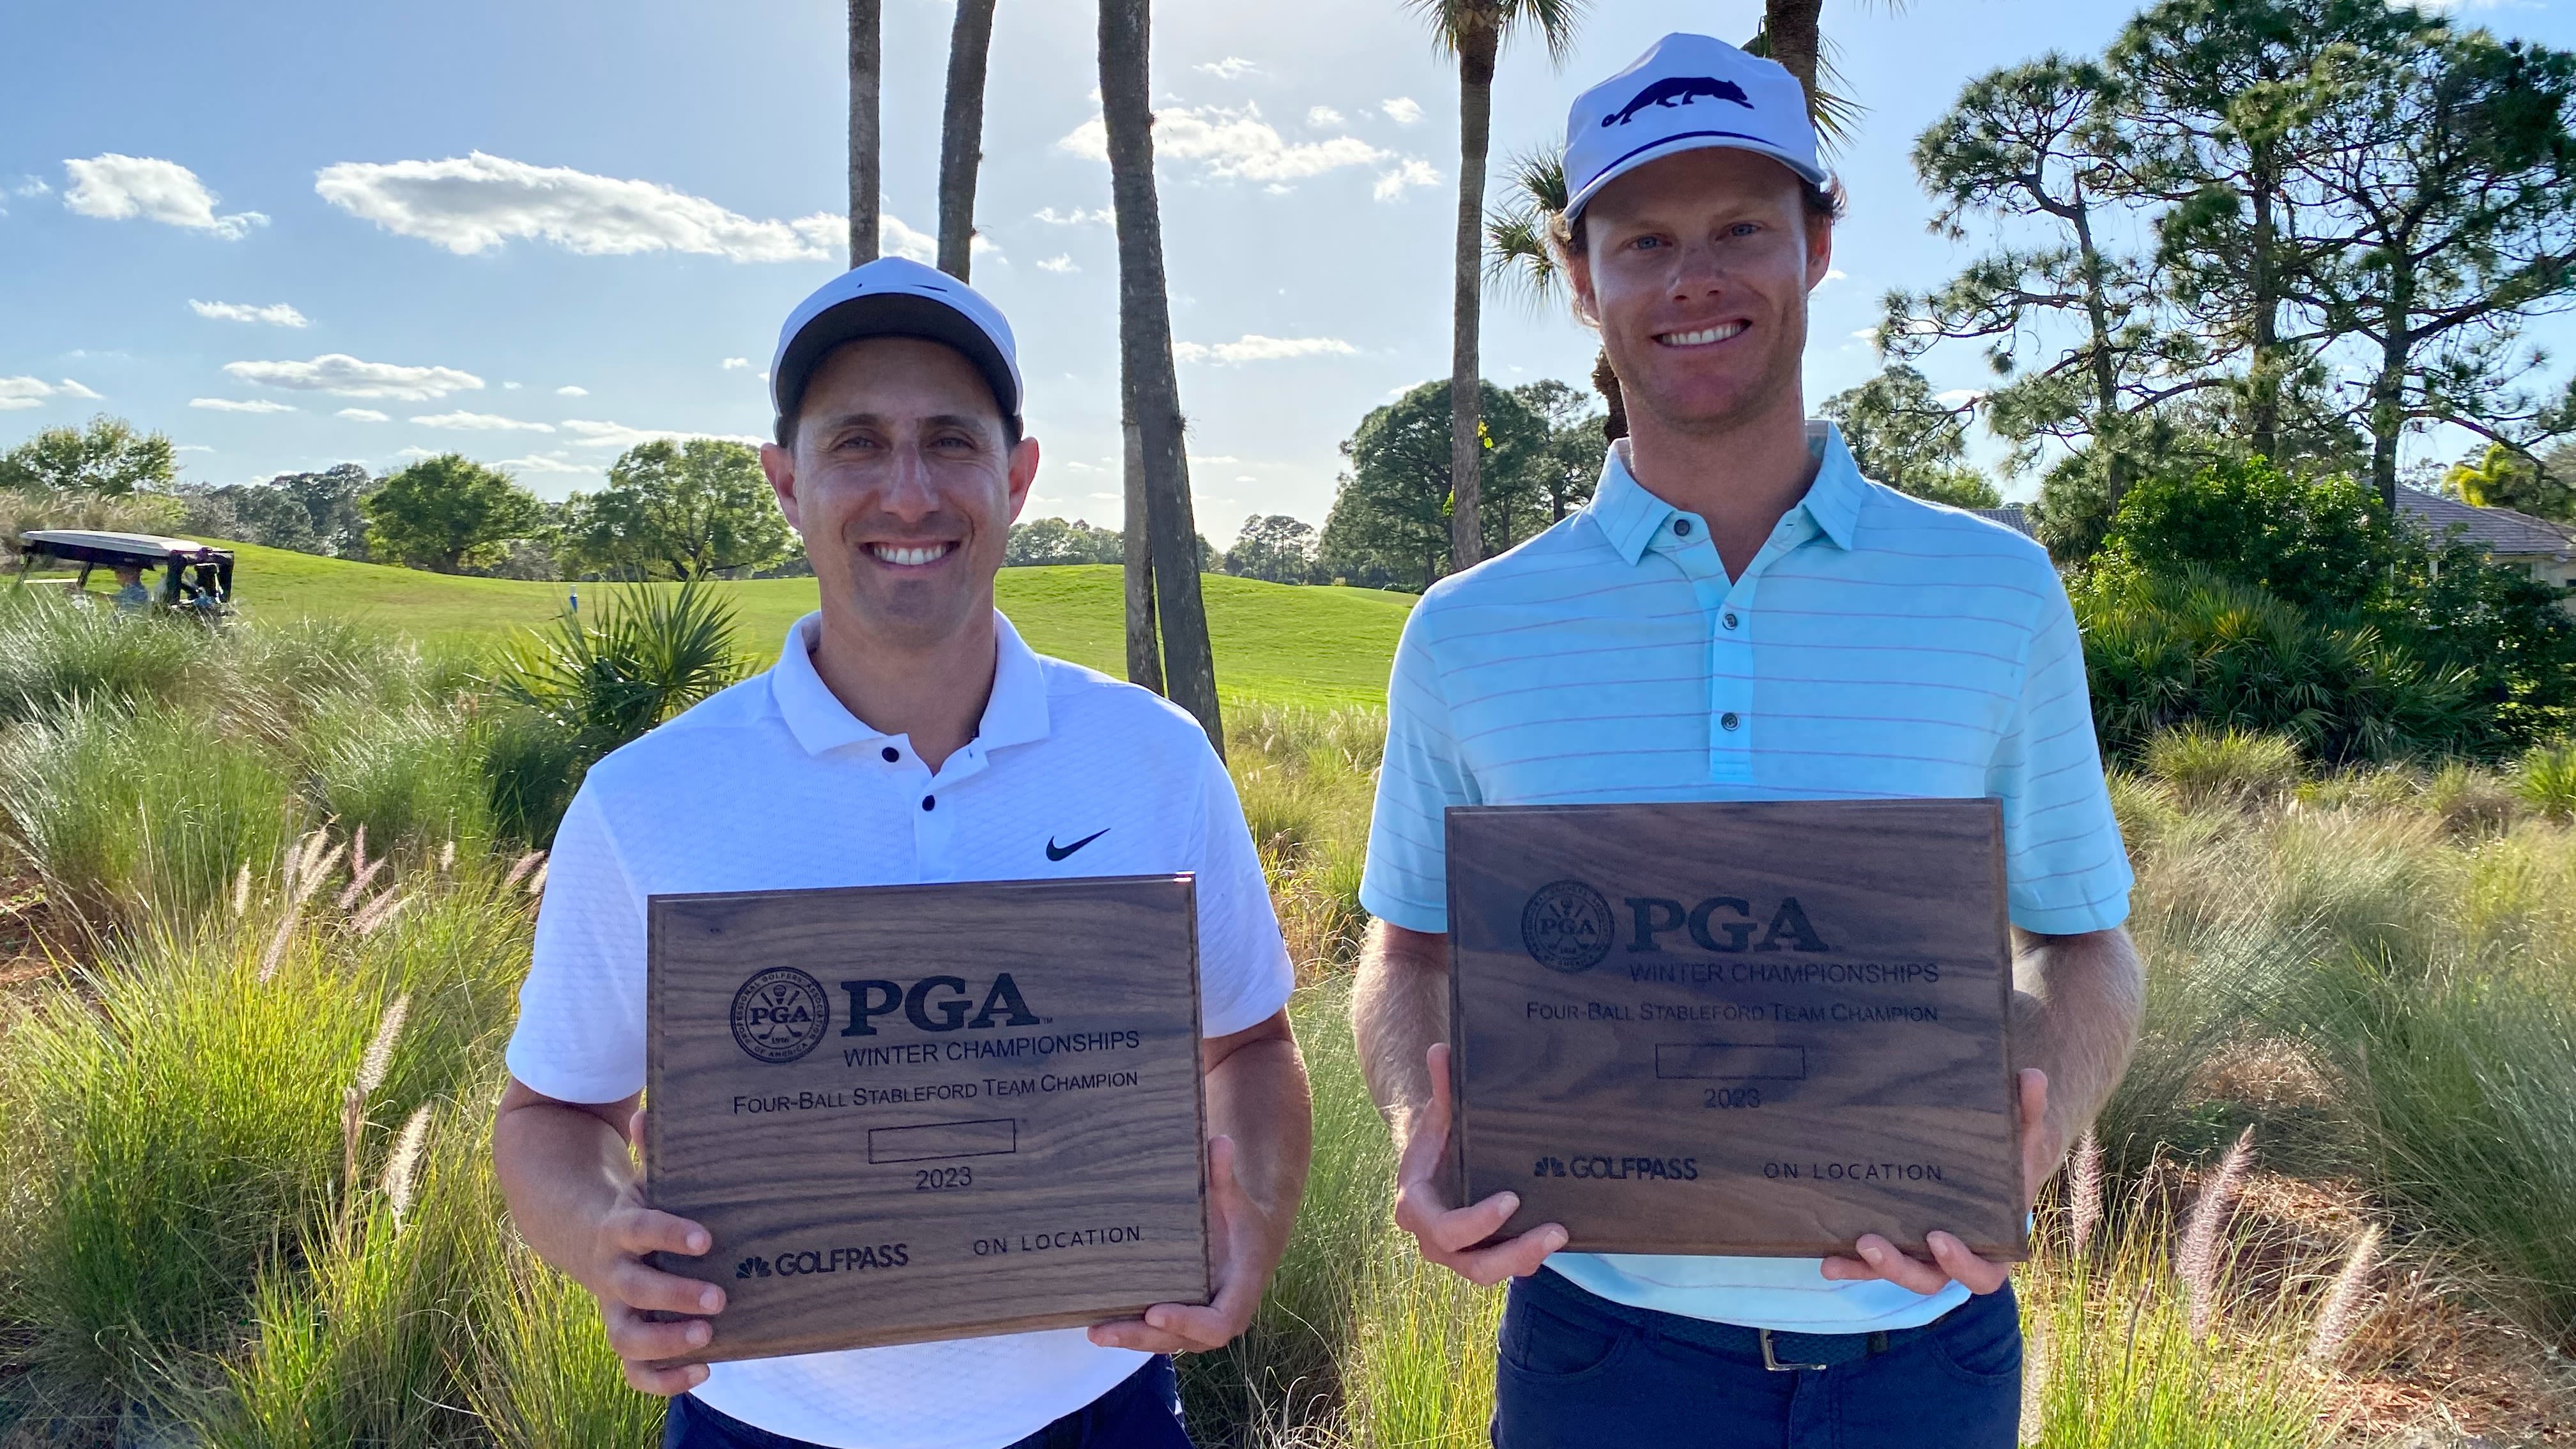 PGA Members Dylan Newman (left) and Benny Cook won the 2023 PGA Four-Ball Team Championship at PGA Golf Club February 7.